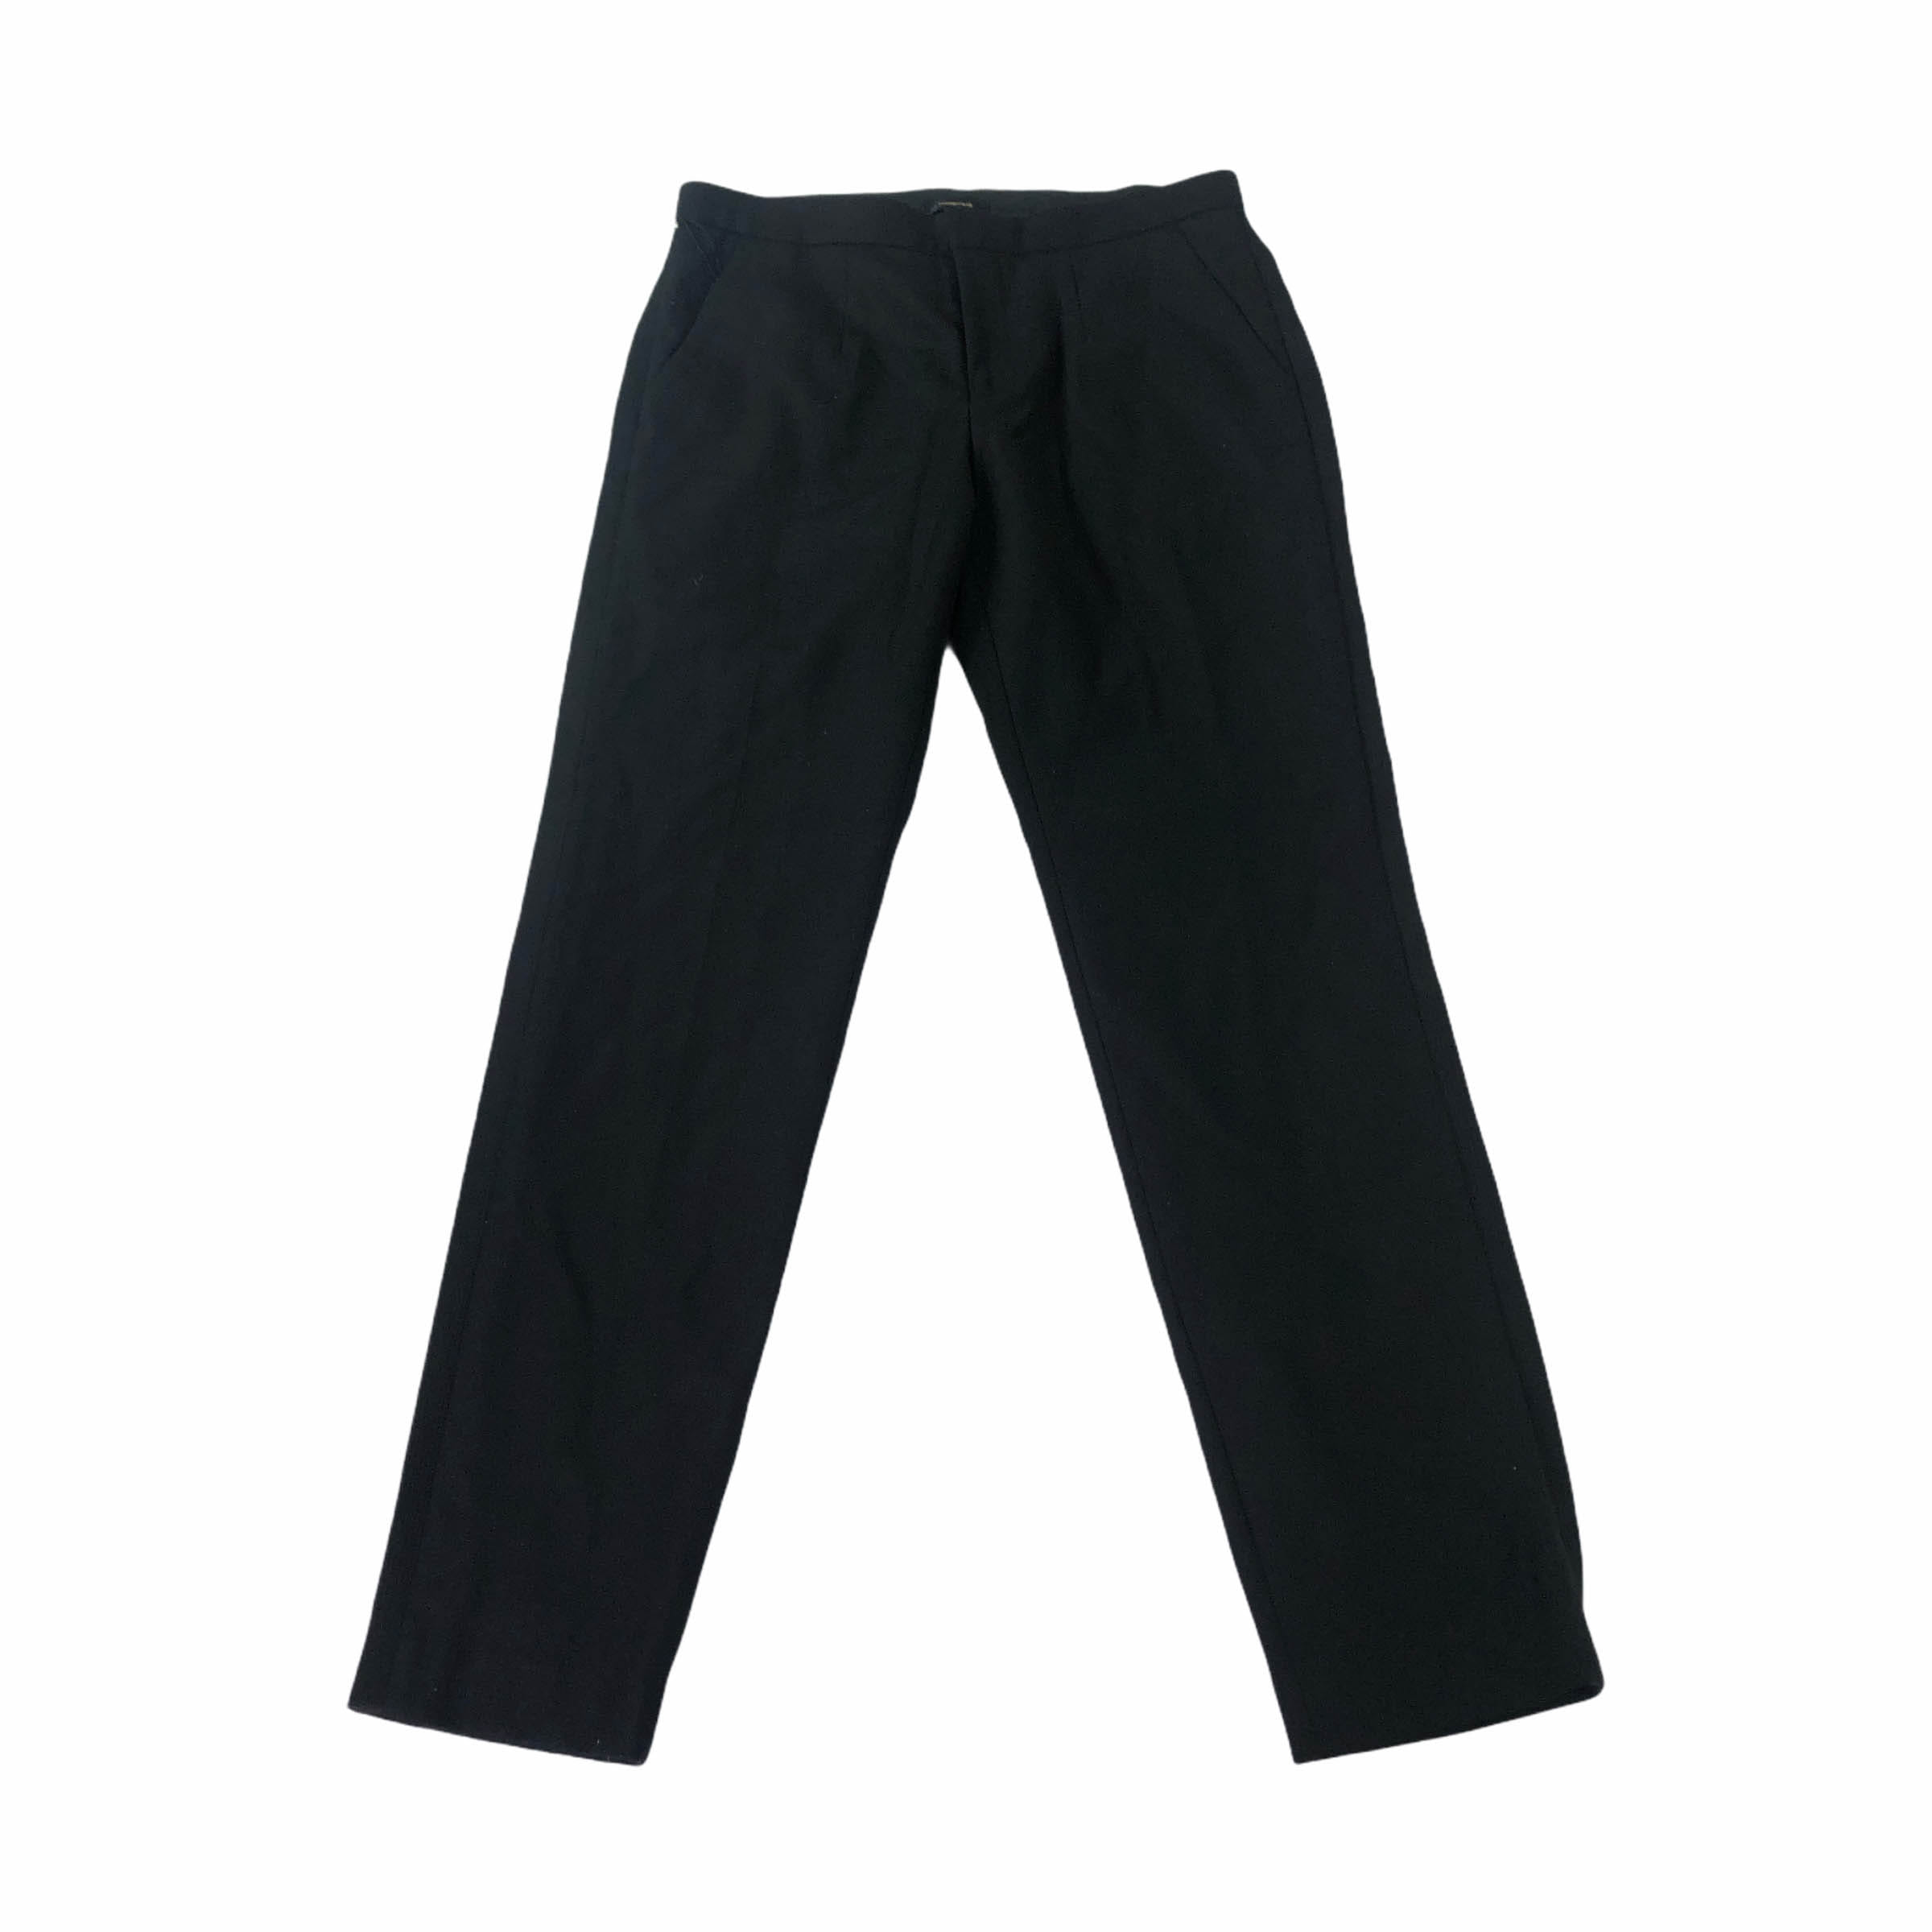 [Undercover] Black Wool Pants - Size 2